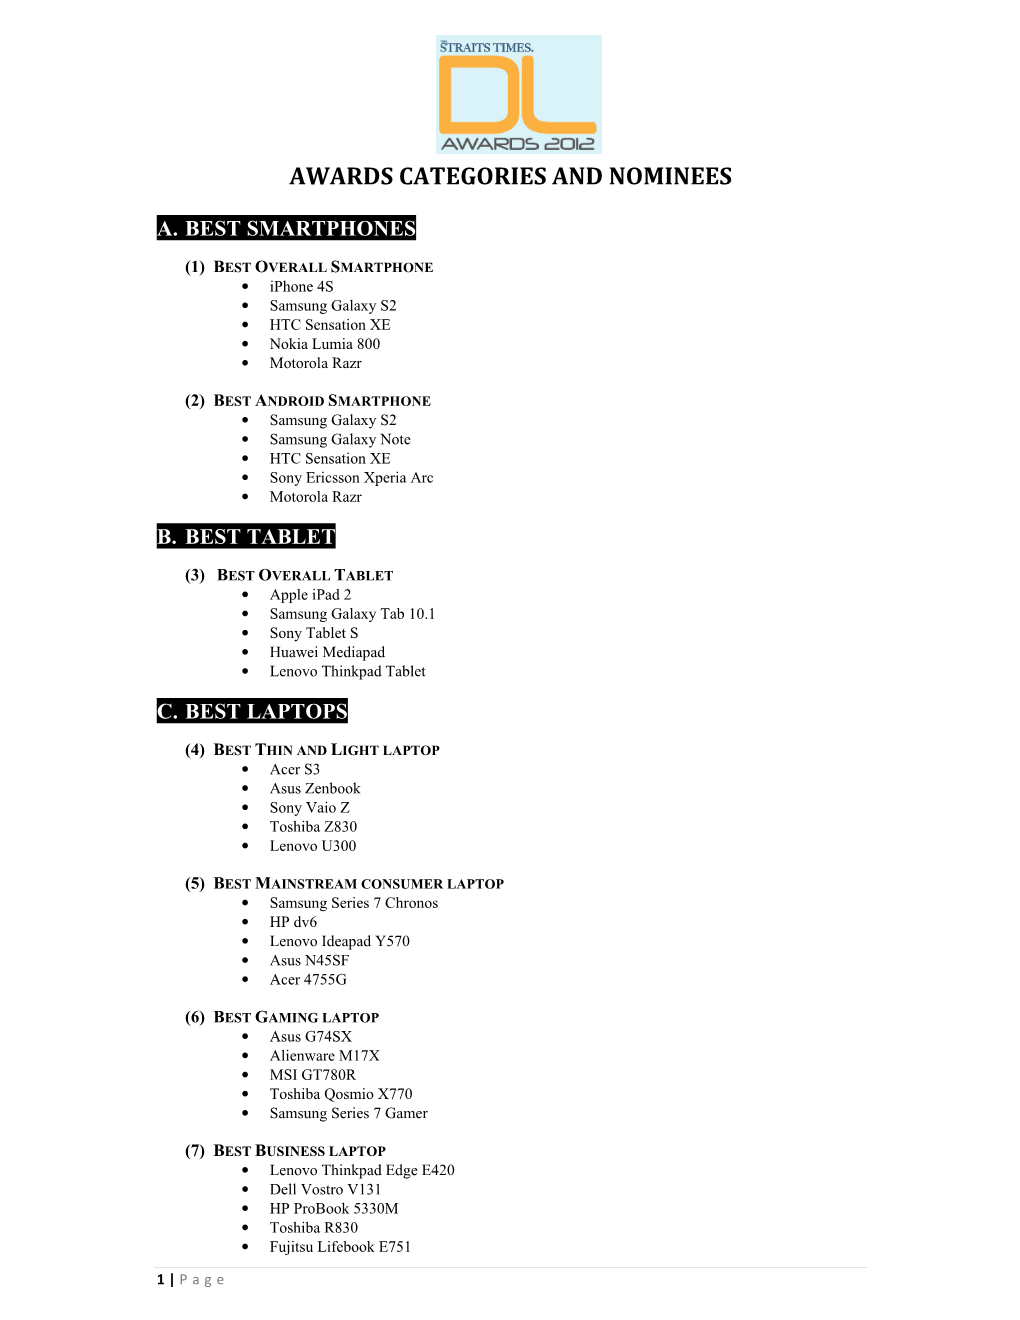 Awards Categories and Nominees